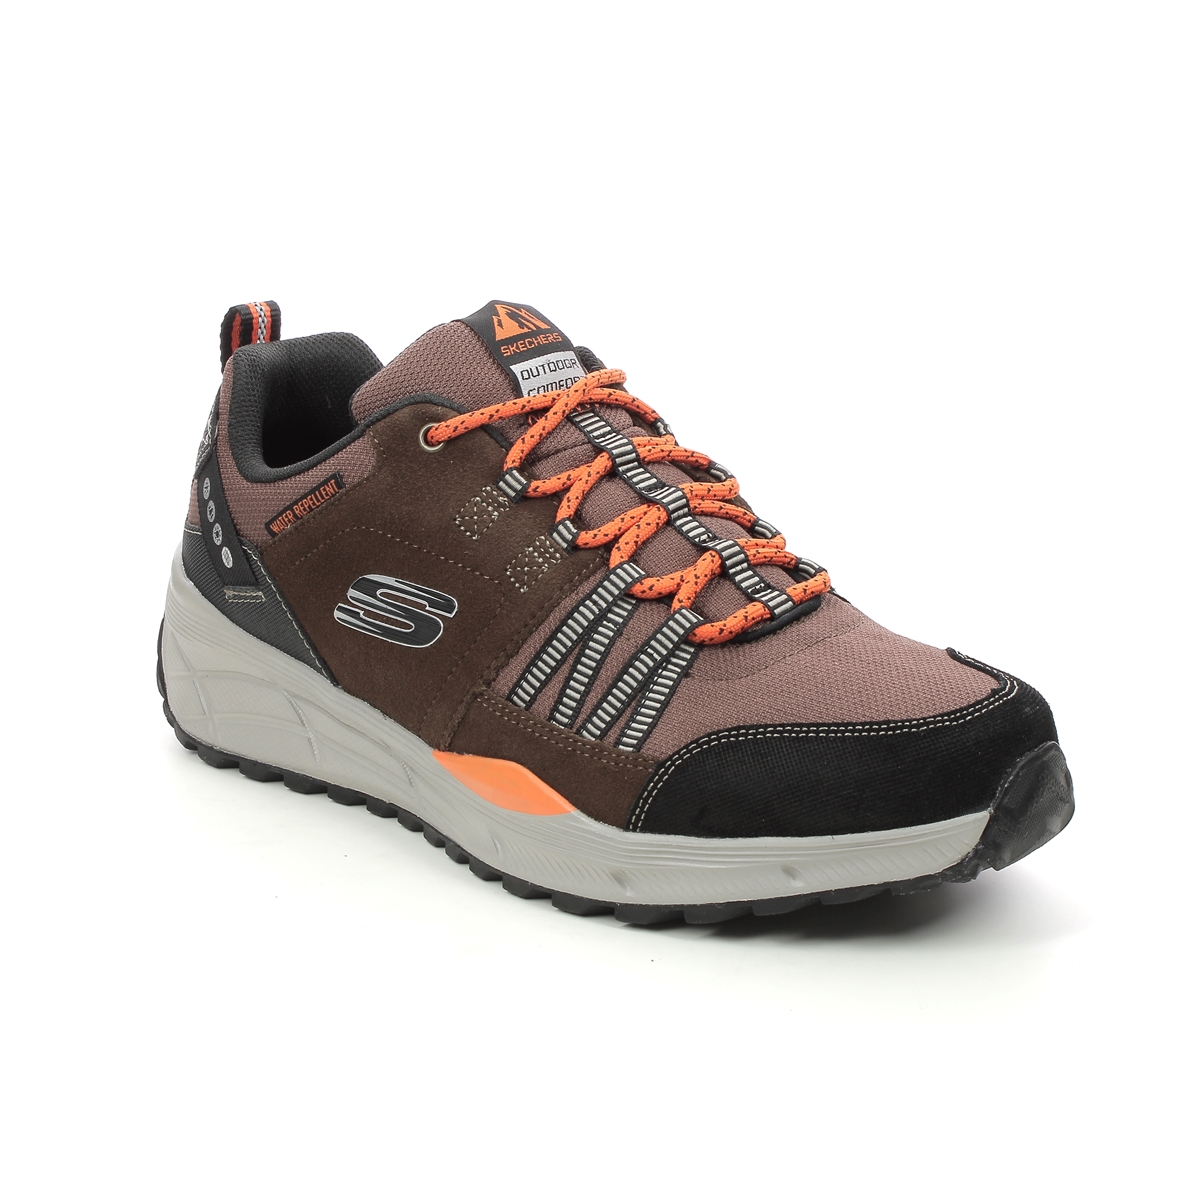 Skechers Equalizer Trail Relaxed Fit BRBK Brown Mens trainers 237023 in a Plain Leather and Man-made in Size 9